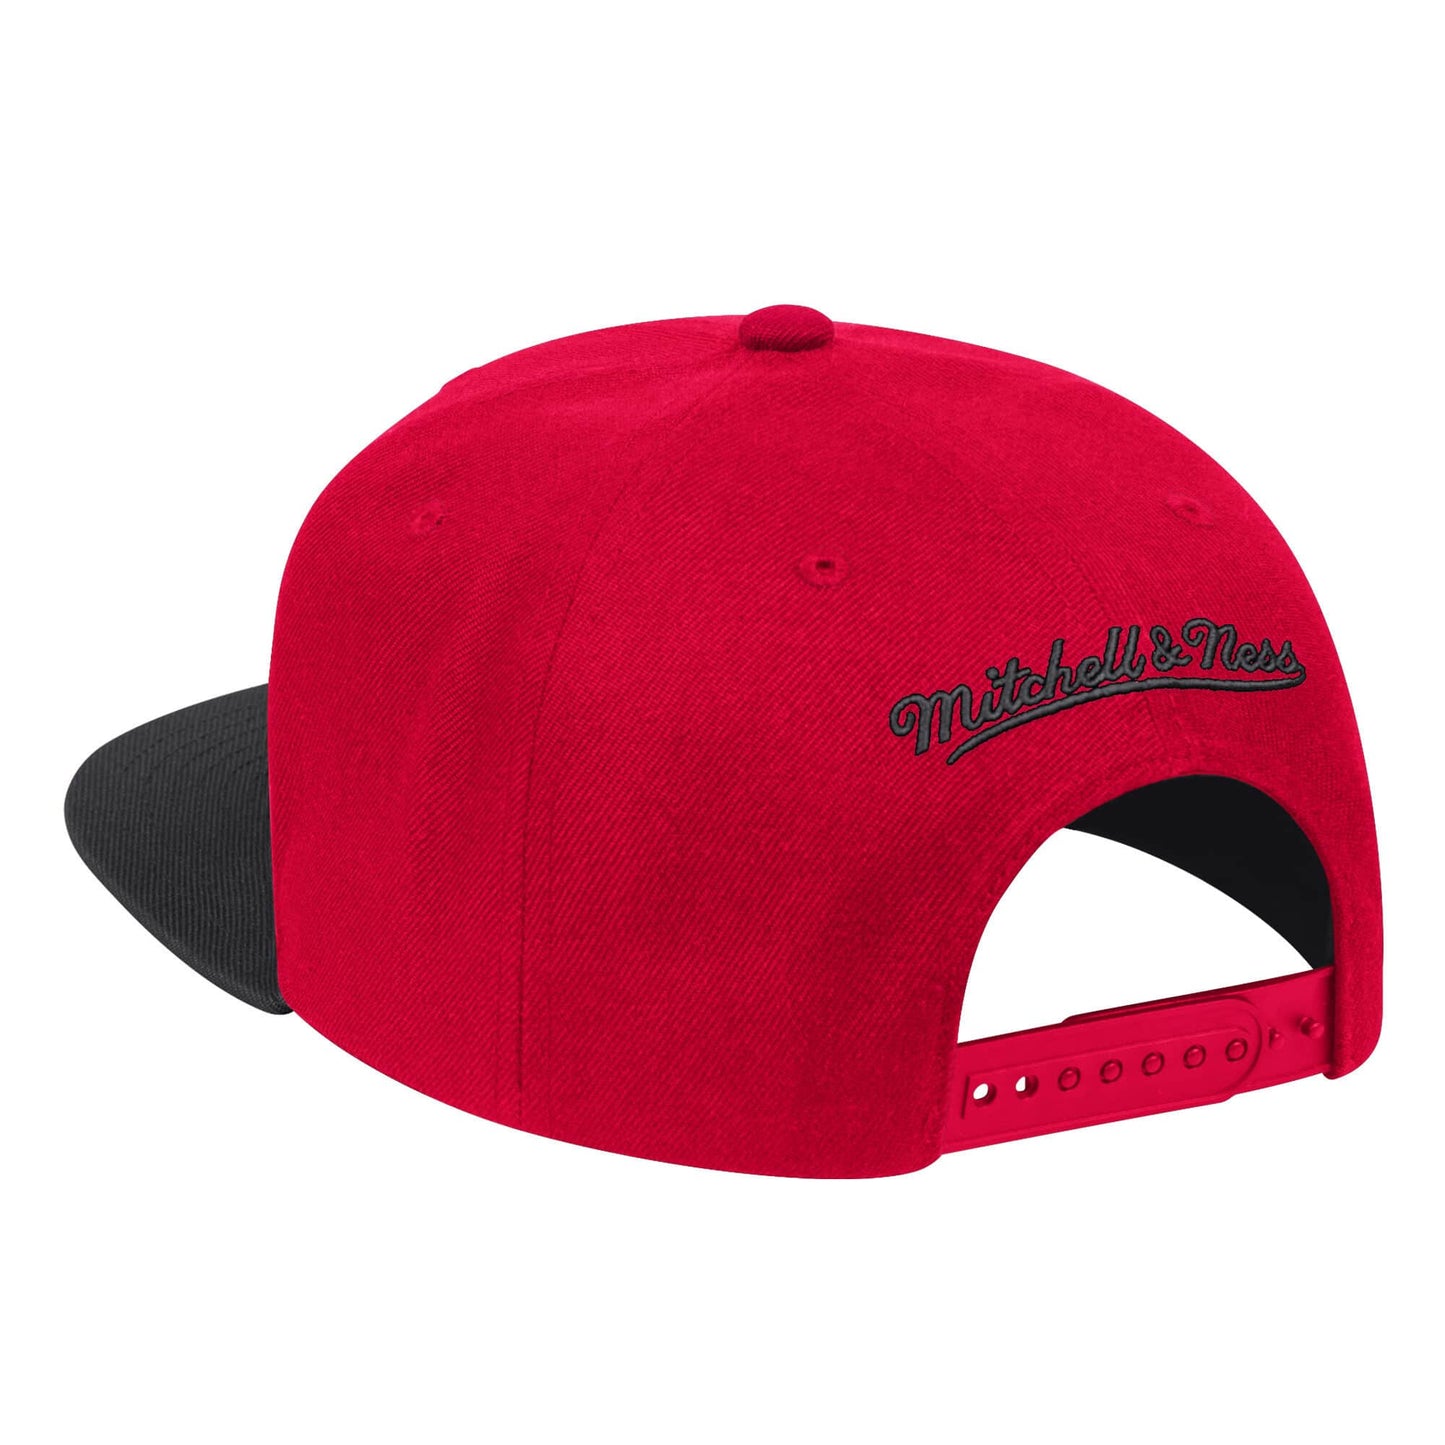 Mens NBA Chicago Bulls Red/Black Wool 2 Tone Snapback Hat By Mitchell And Ness